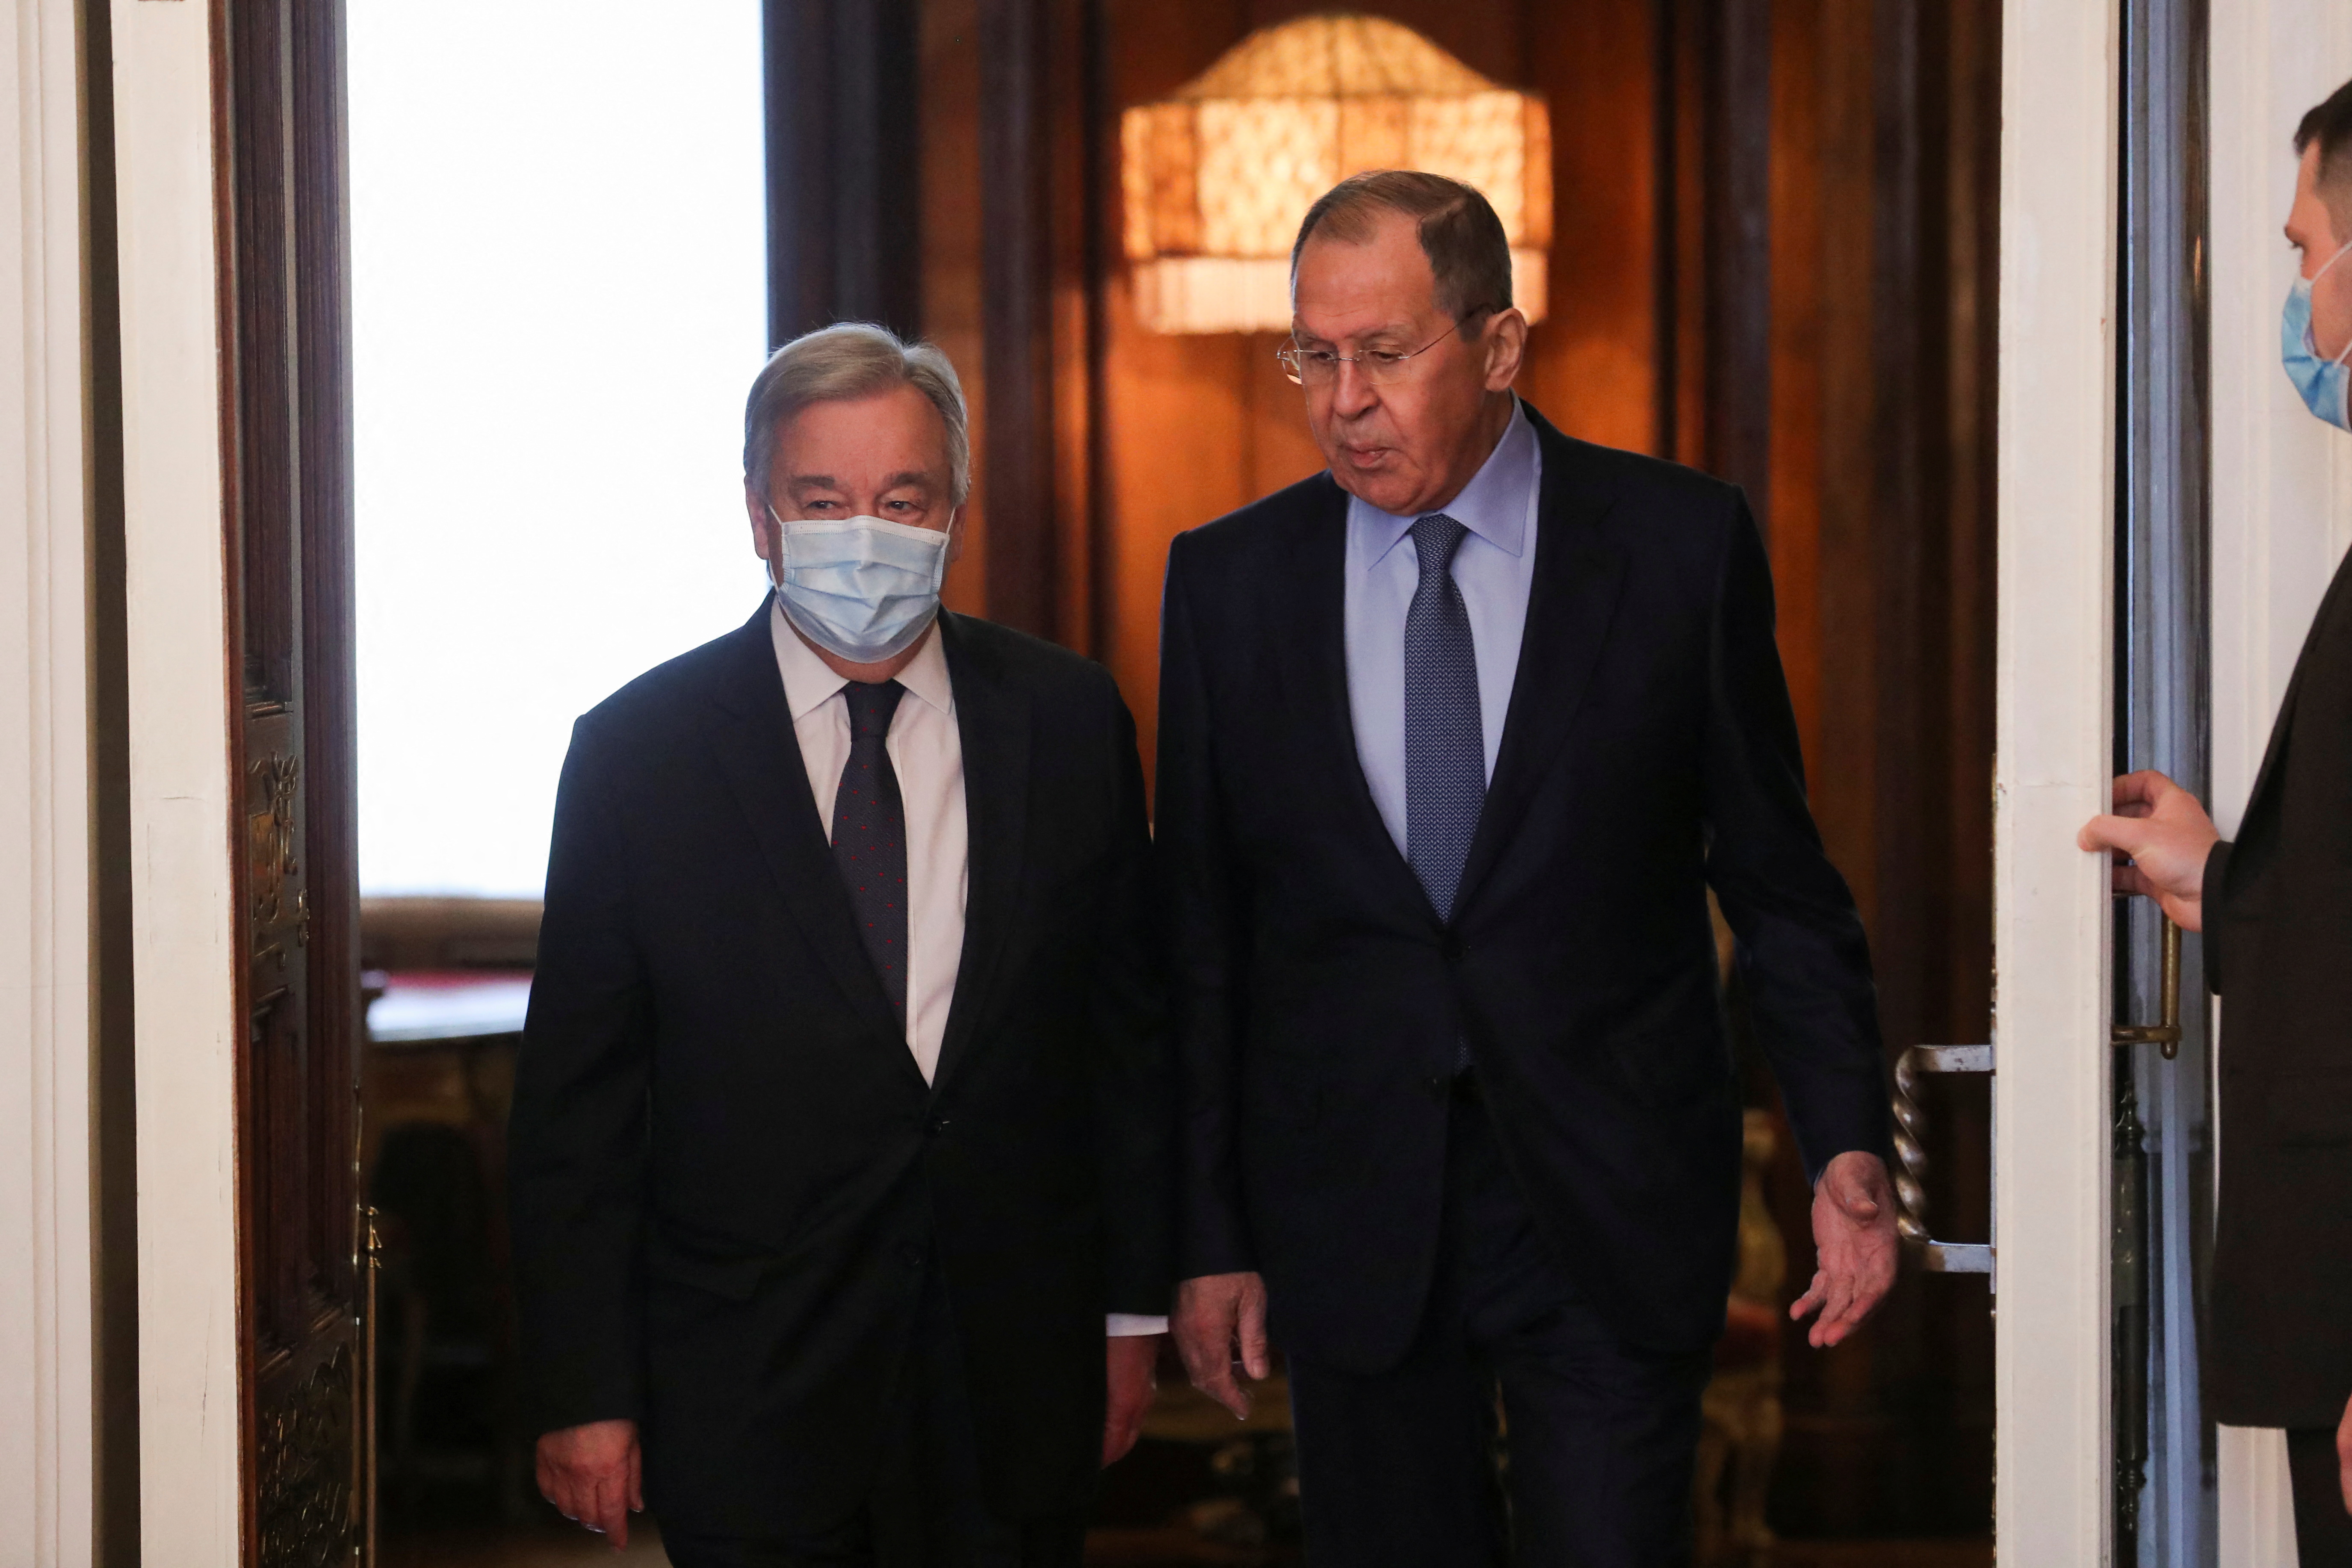 UN Secretary-General Guterres, left, meets Lavrov, right, in Moscow, Russia, on April 26.